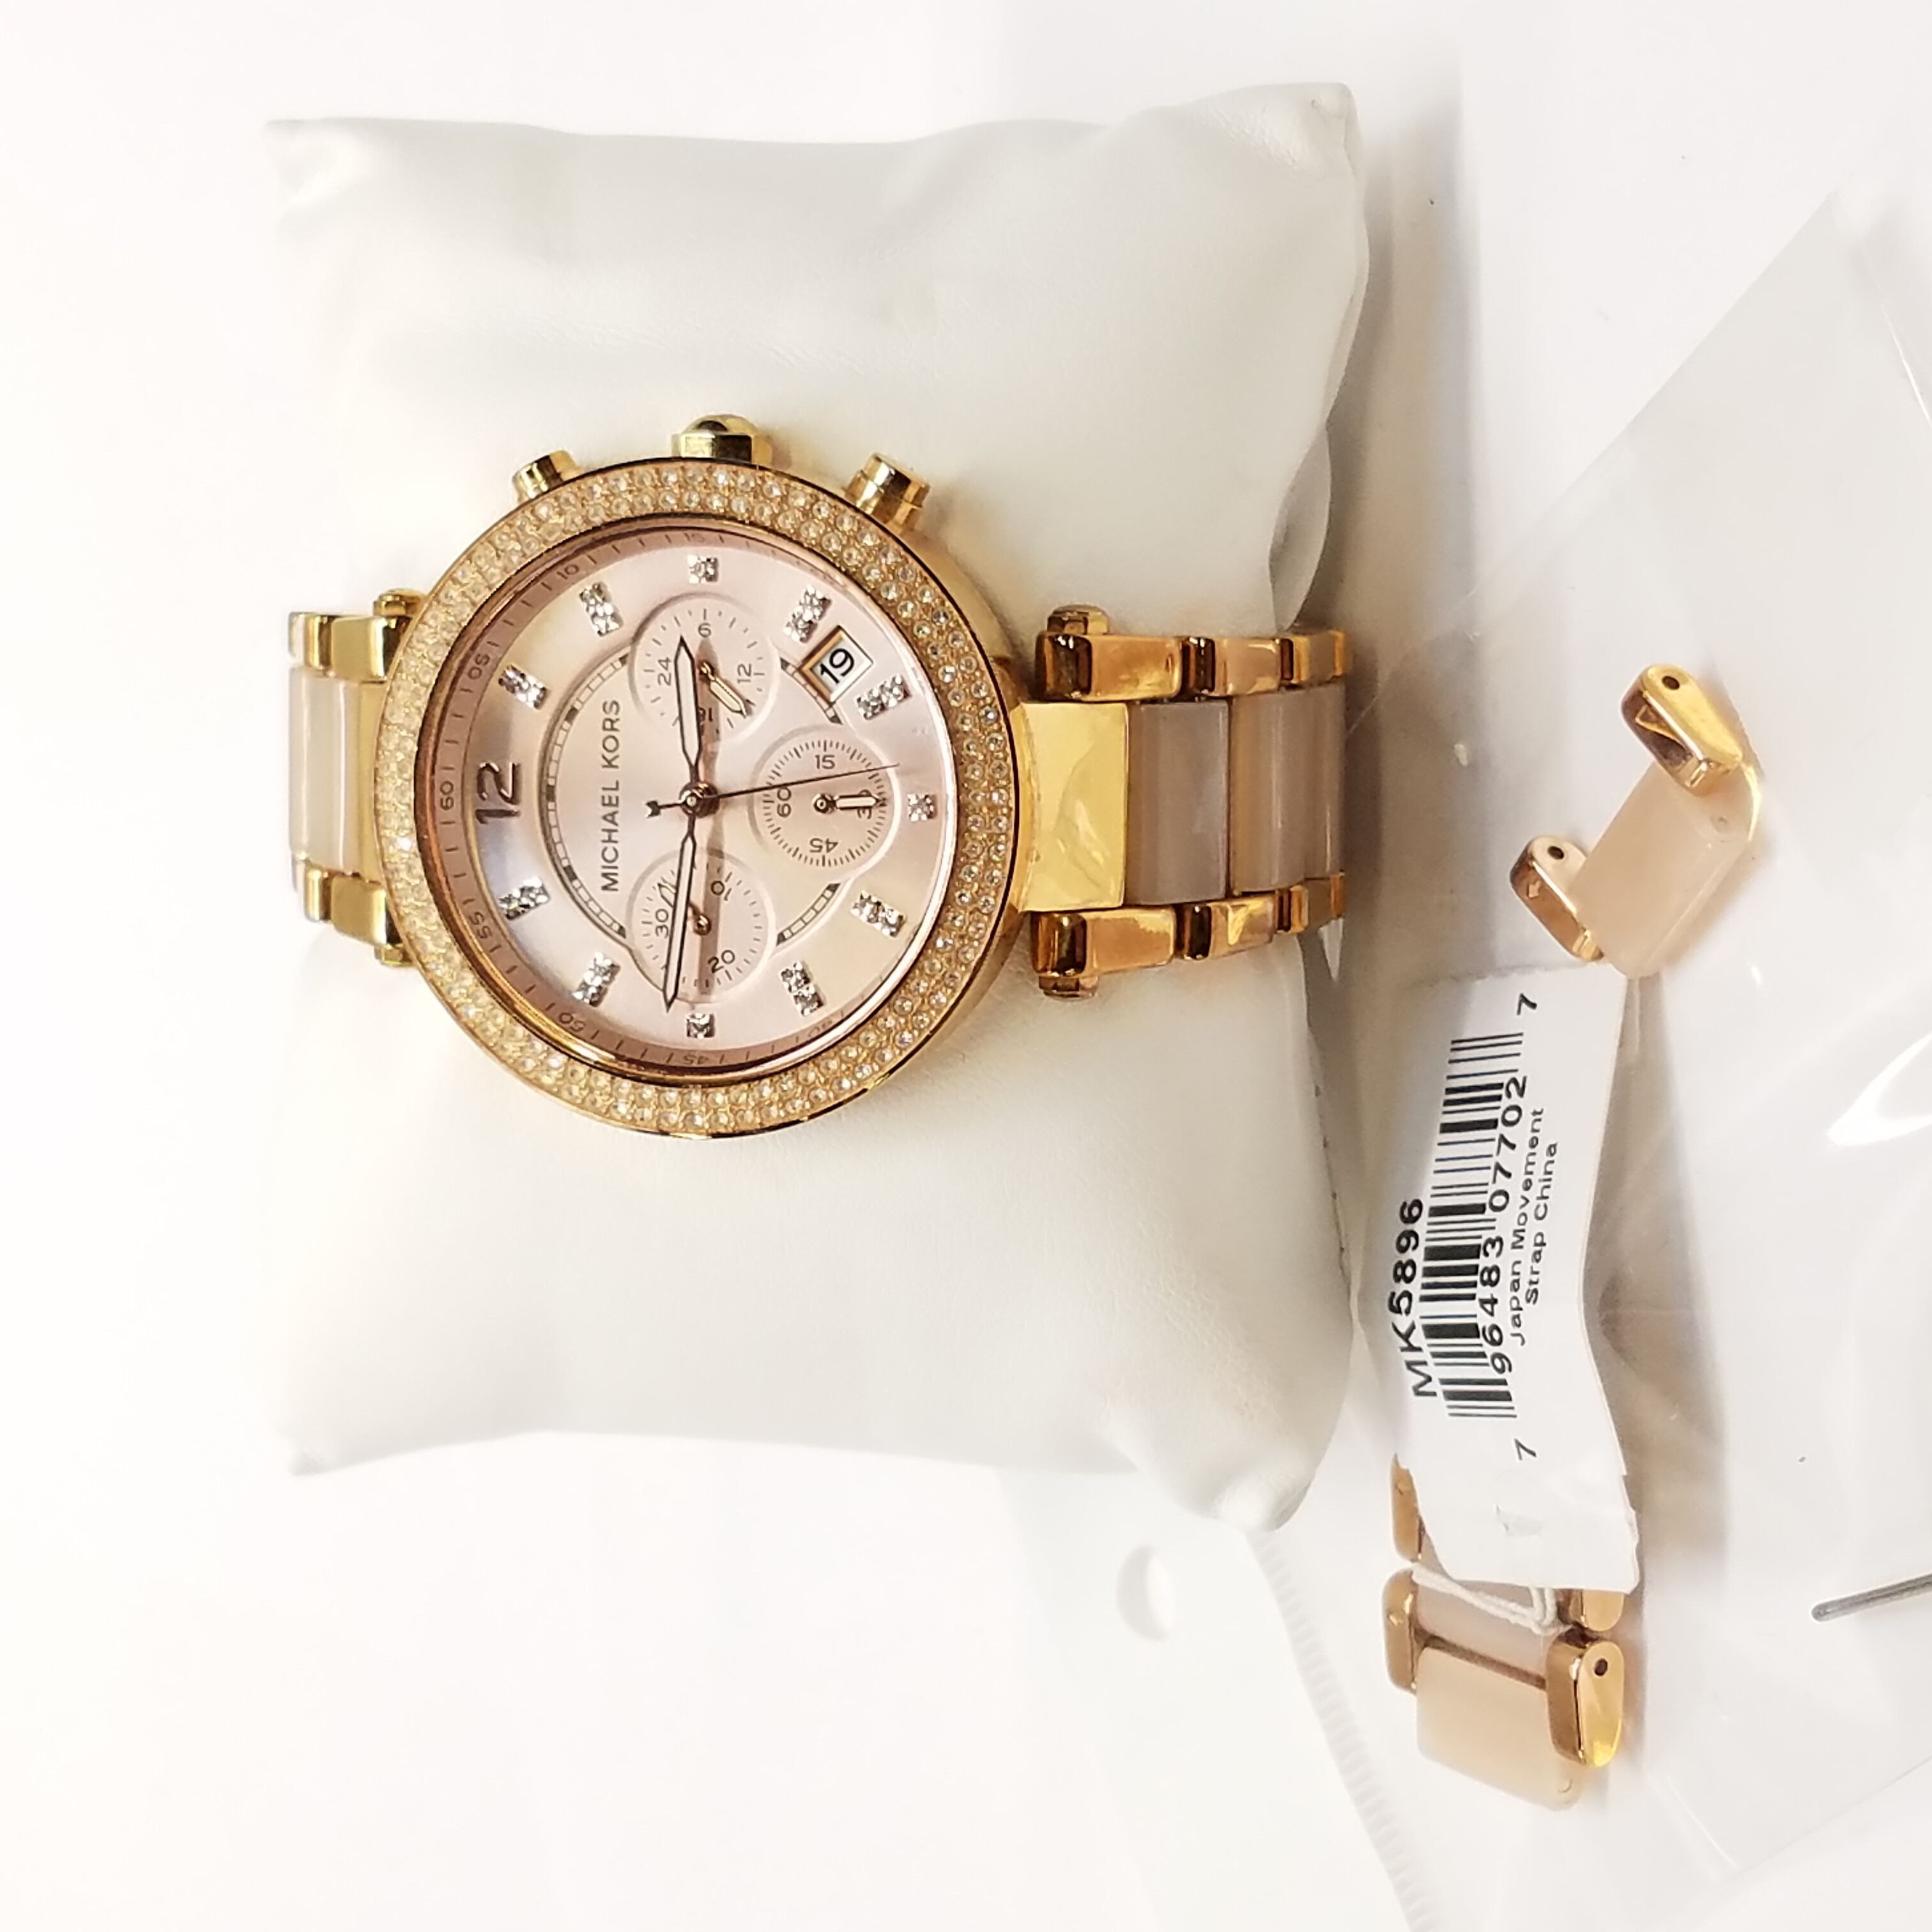 Michael Kors MK 5896 brand new watch Mobile Phones  Gadgets Wearables   Smart Watches on Carousell